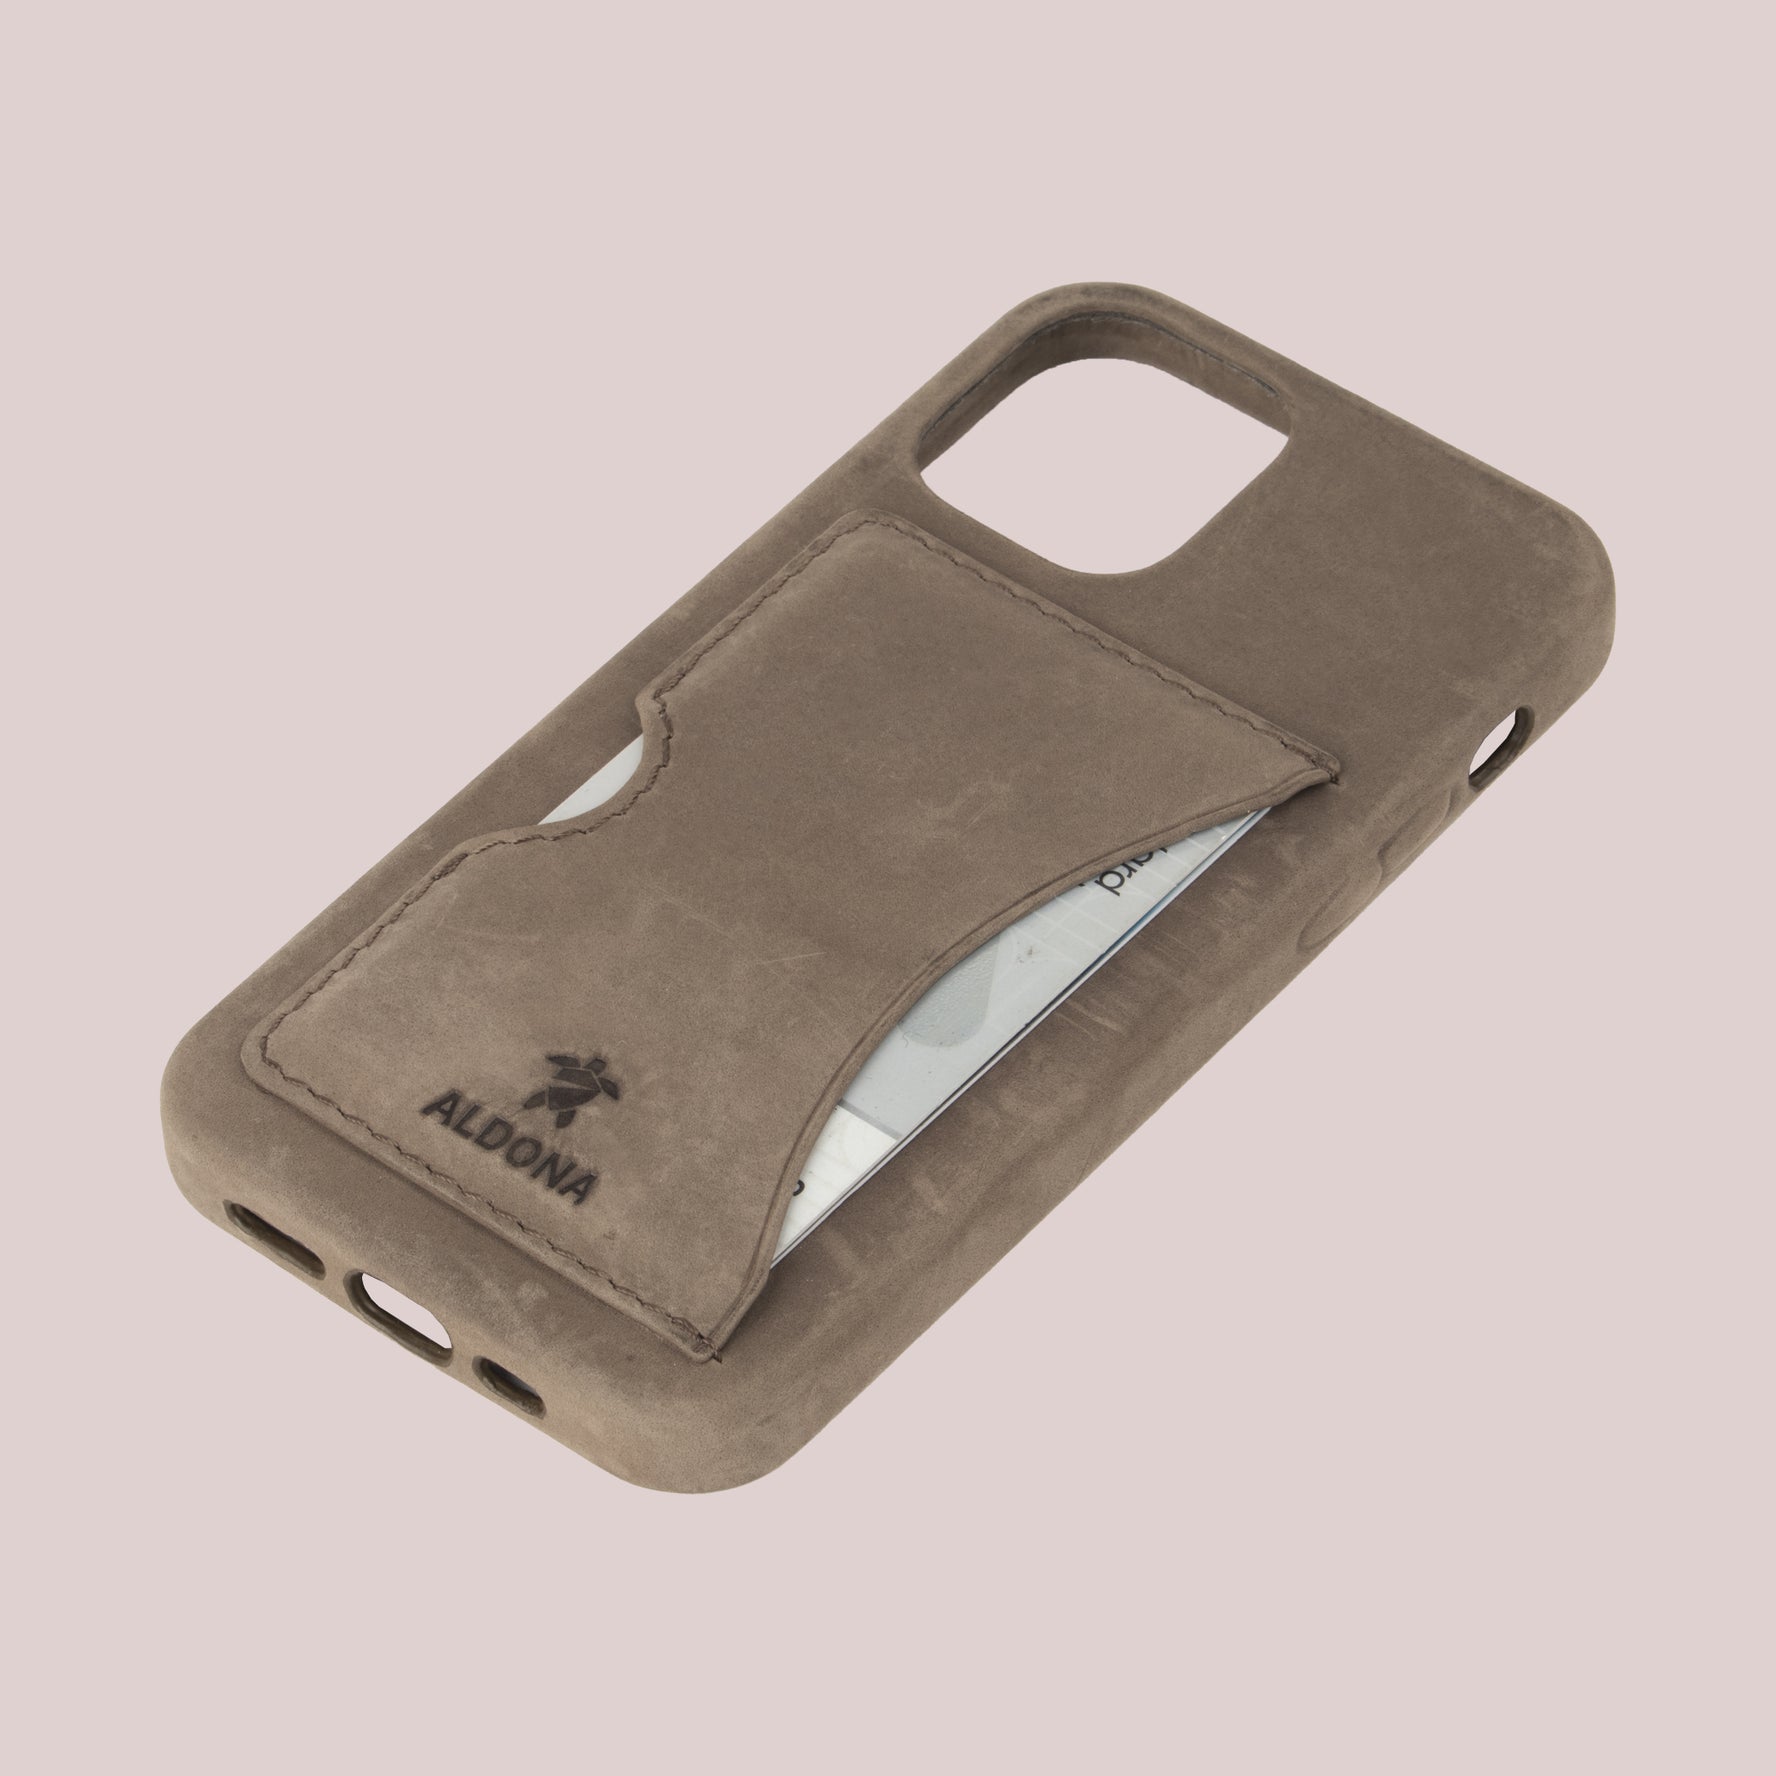 Baxter Card Case for iPhone 13 series - Burnt Tobacco